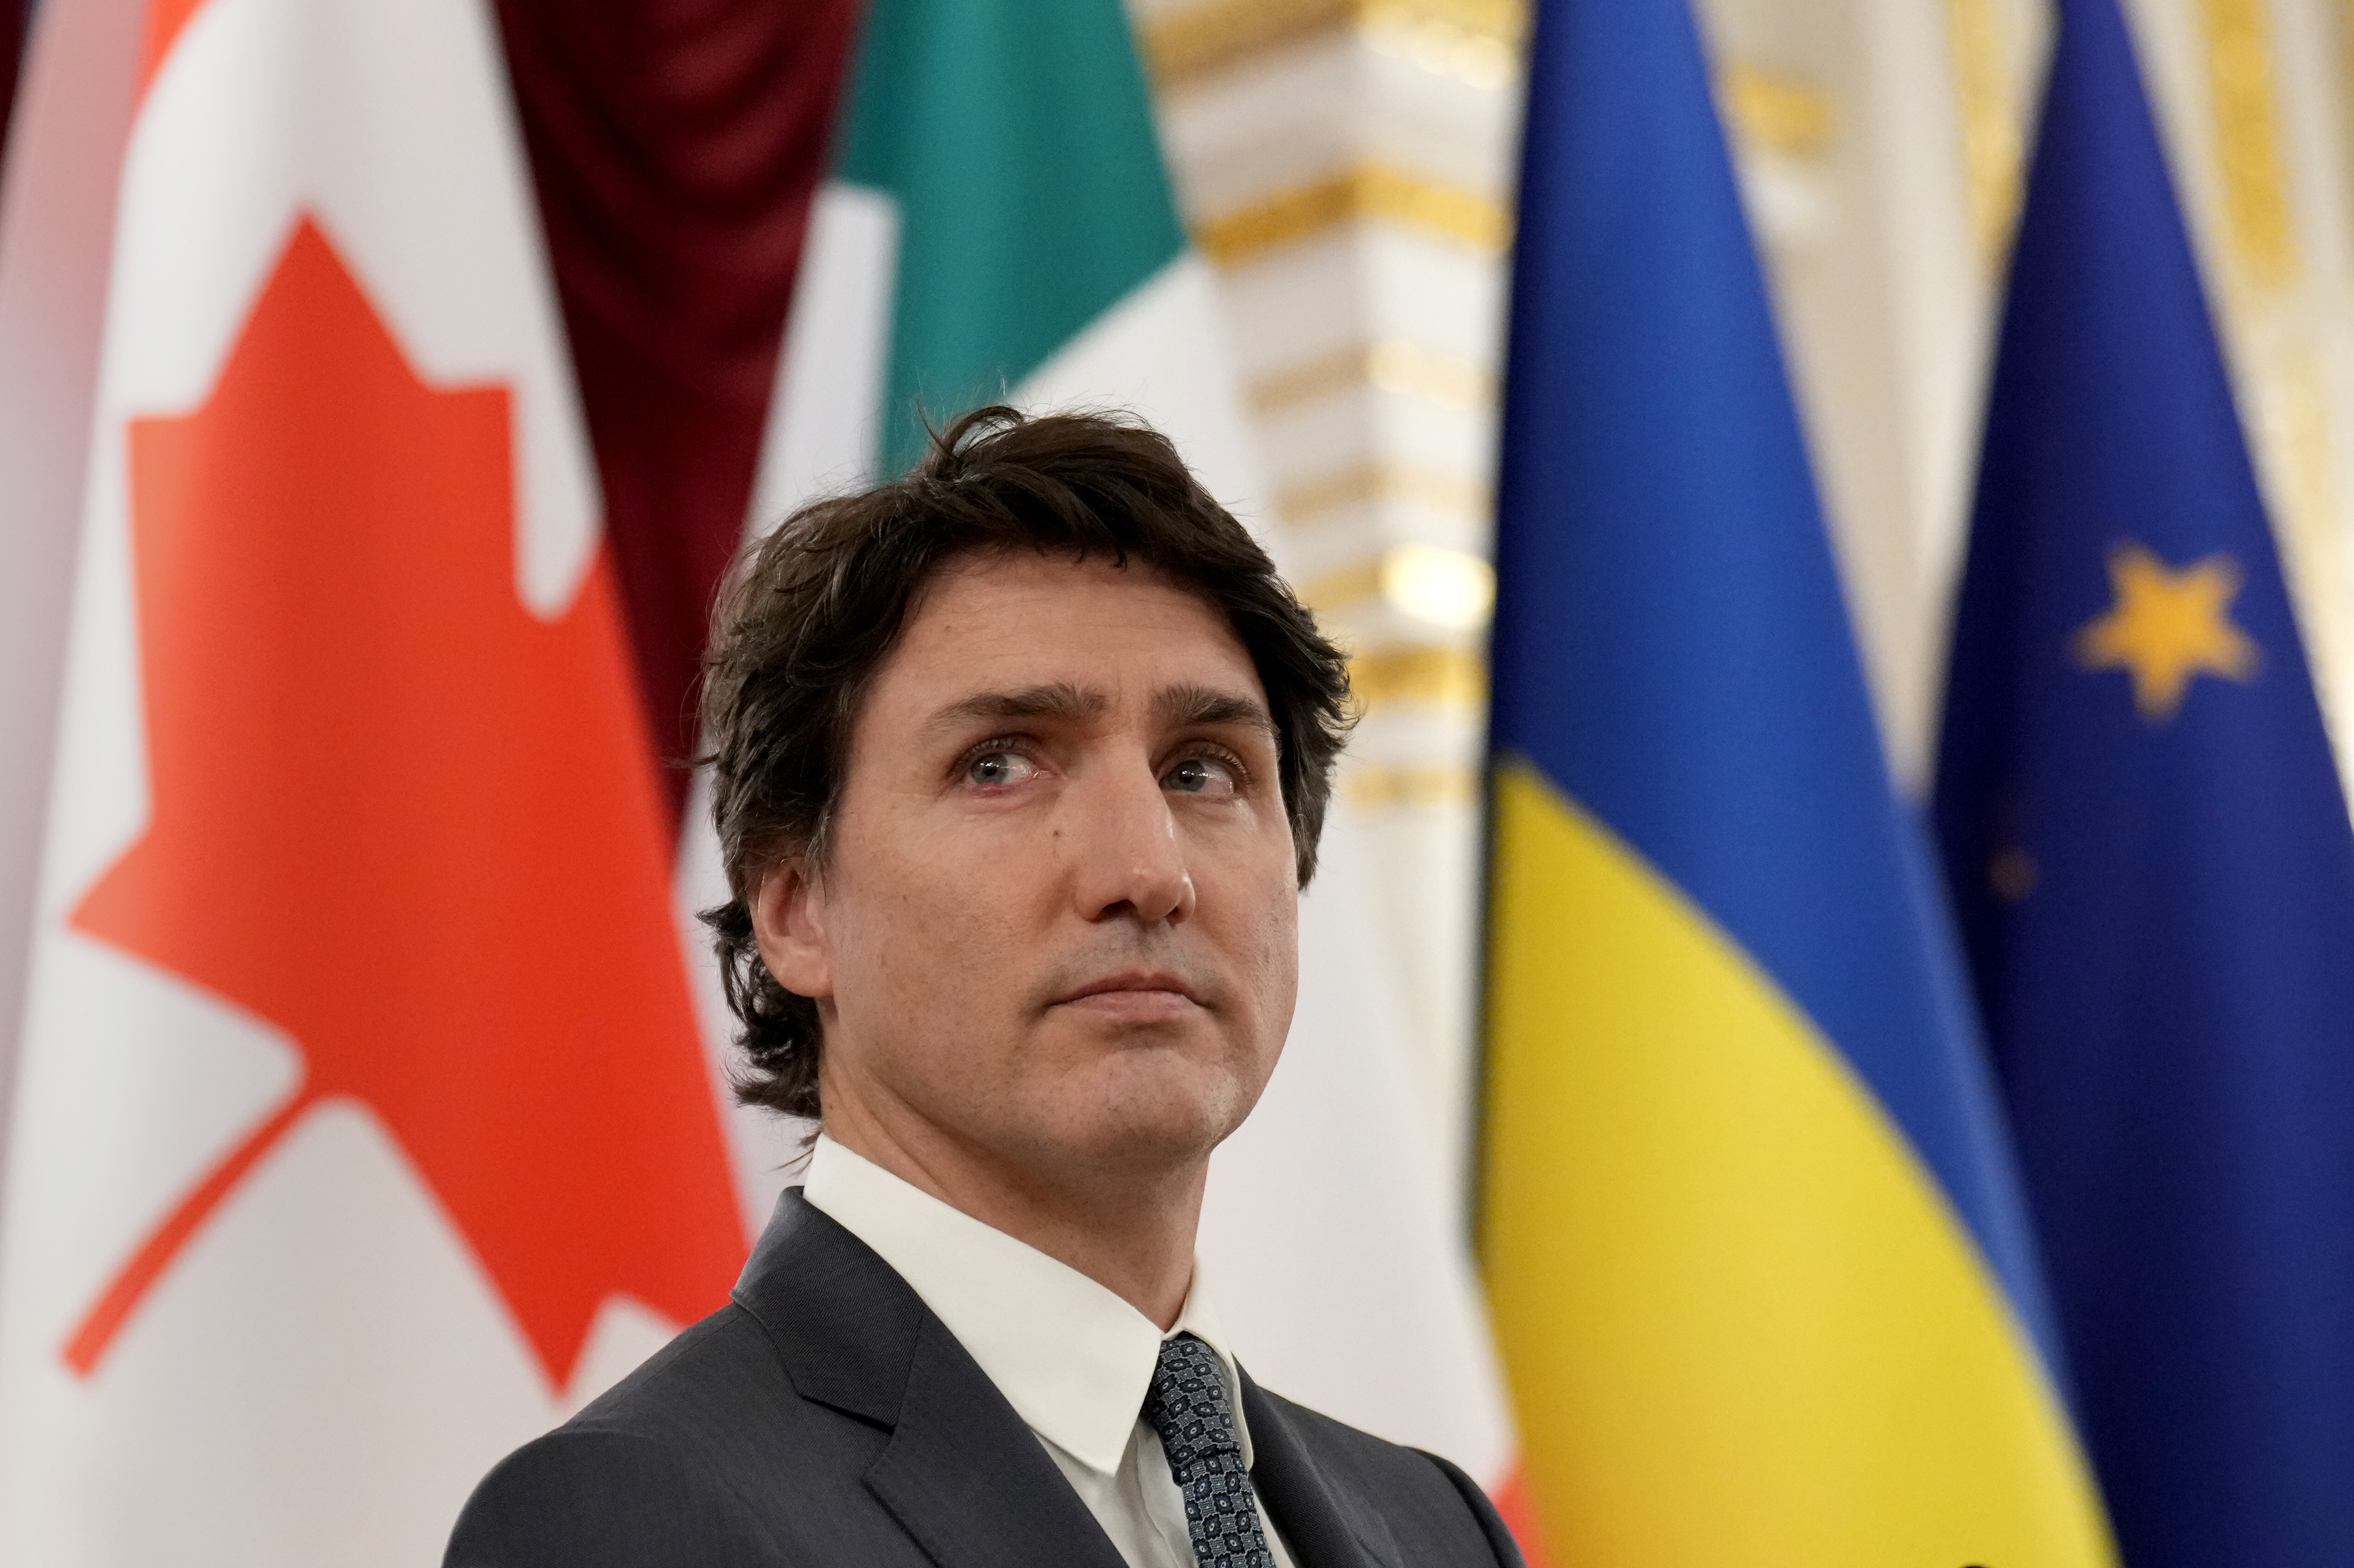 Trudeau calls Putin a “weakling” for executing Navalny, other opponents